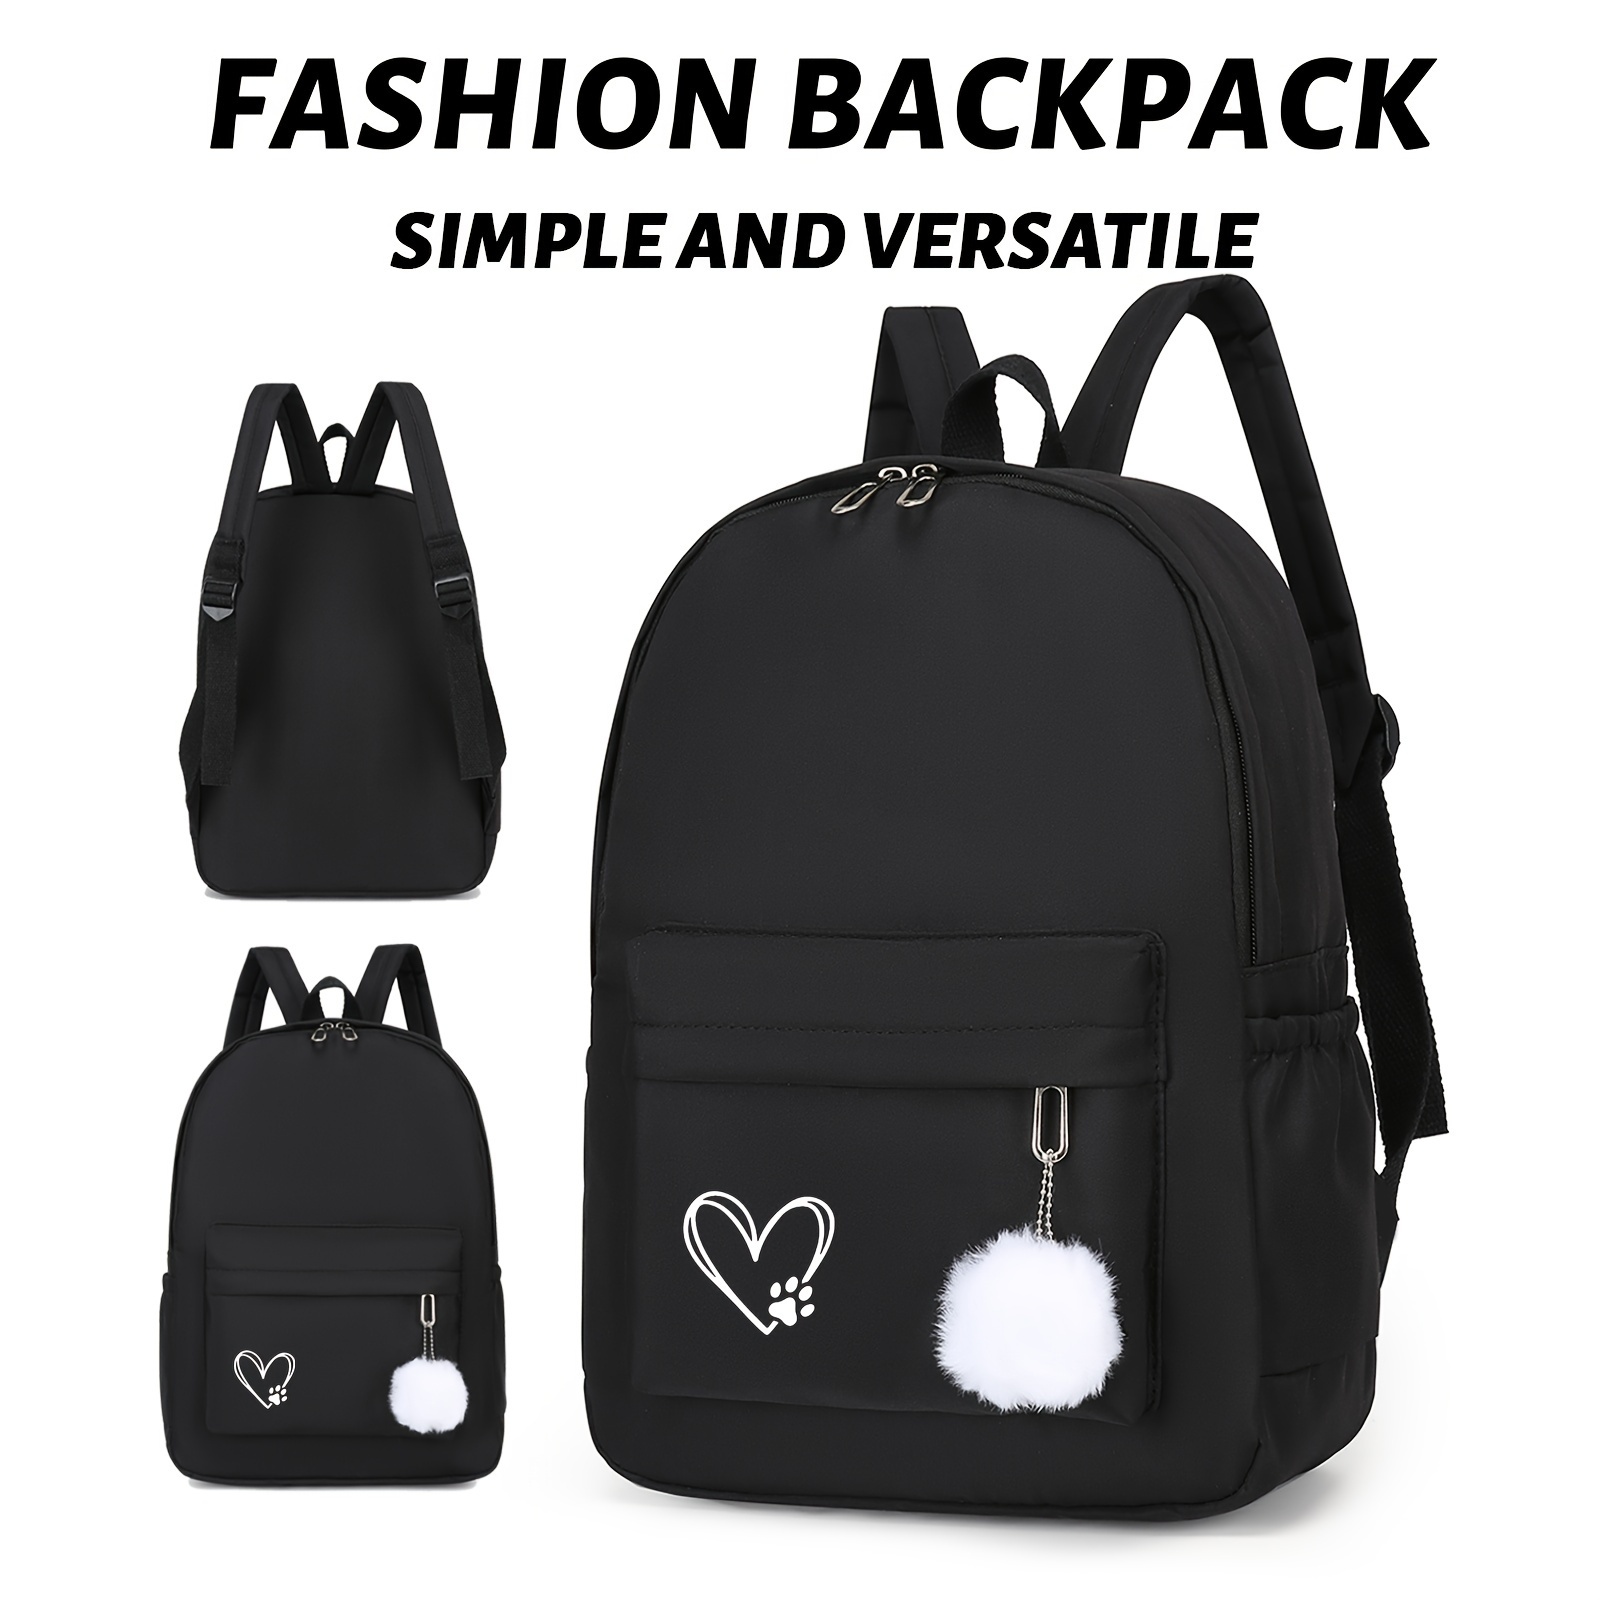 

Simple Versatile Pattern Casual Backpack, Stylish And Versatile Black Backpack, Suitable For Travel, Large Capacity, Suitable For Men And Women, Multi Functional Schoolbag